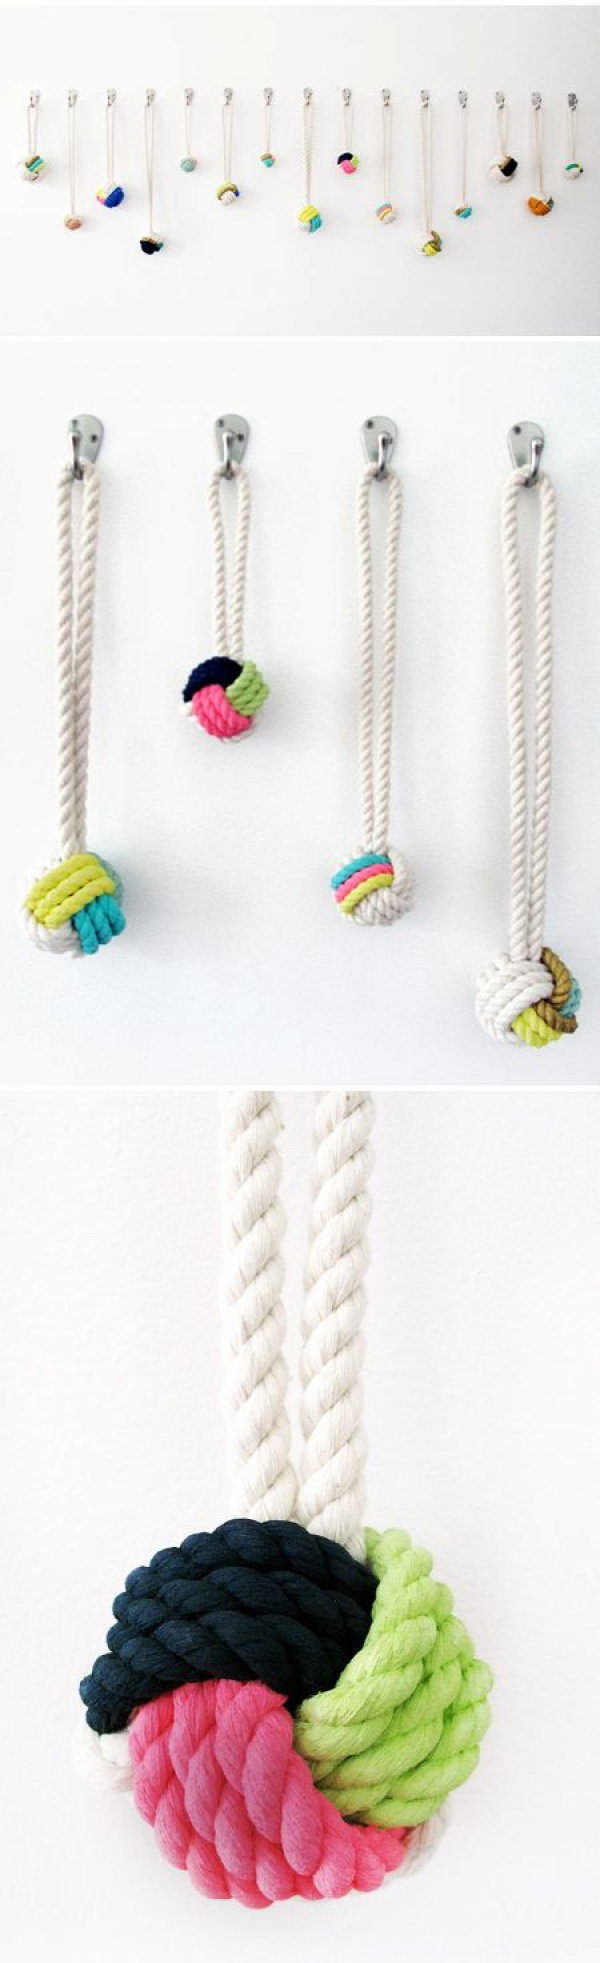 .Rope Ball Necklace